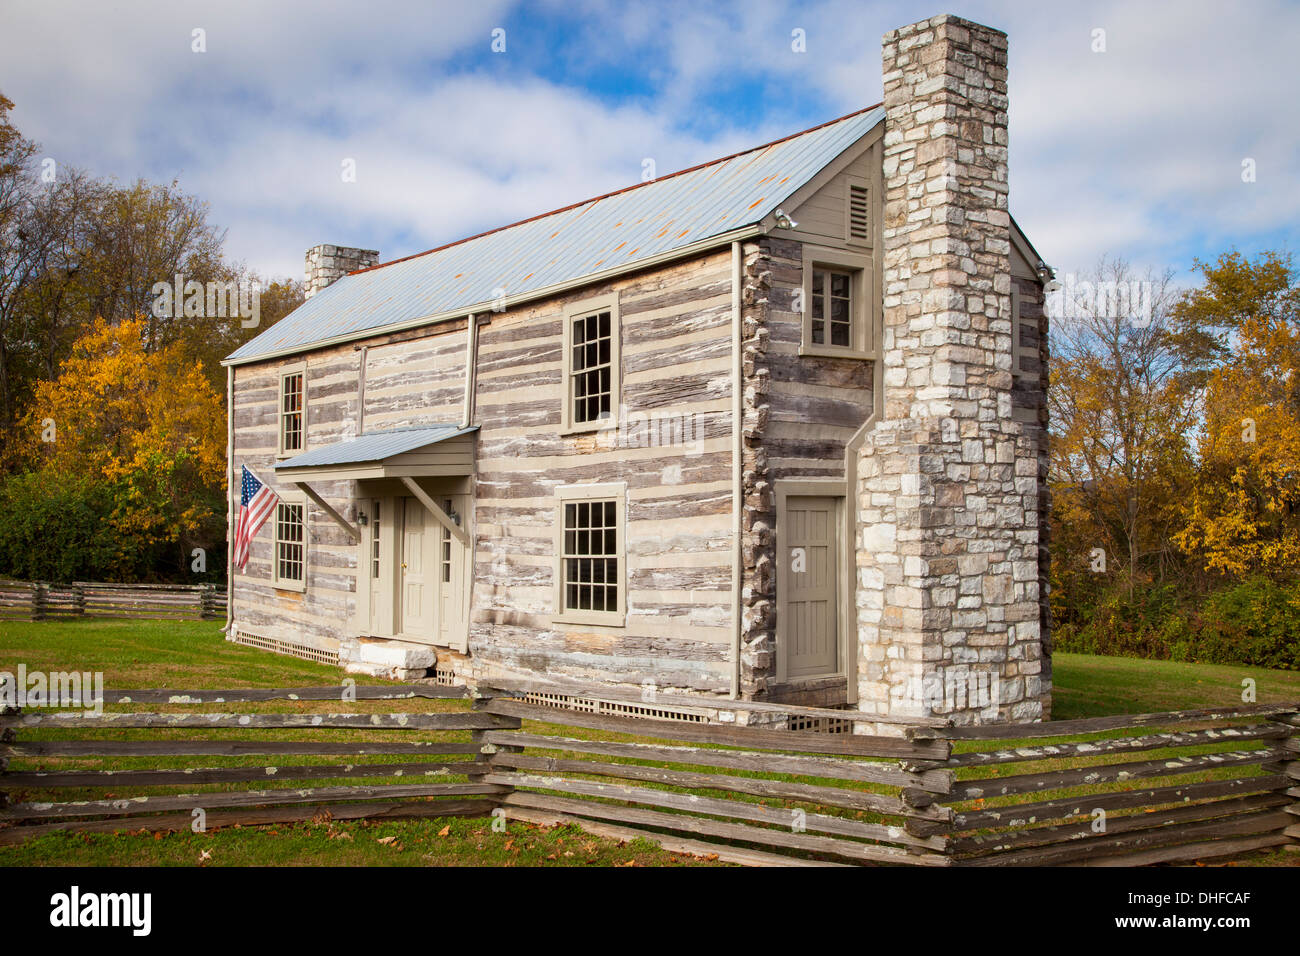 Gatlin Log House (b. 1830), a Crockett parco statale, Brentwood Tennessee, USA Foto Stock